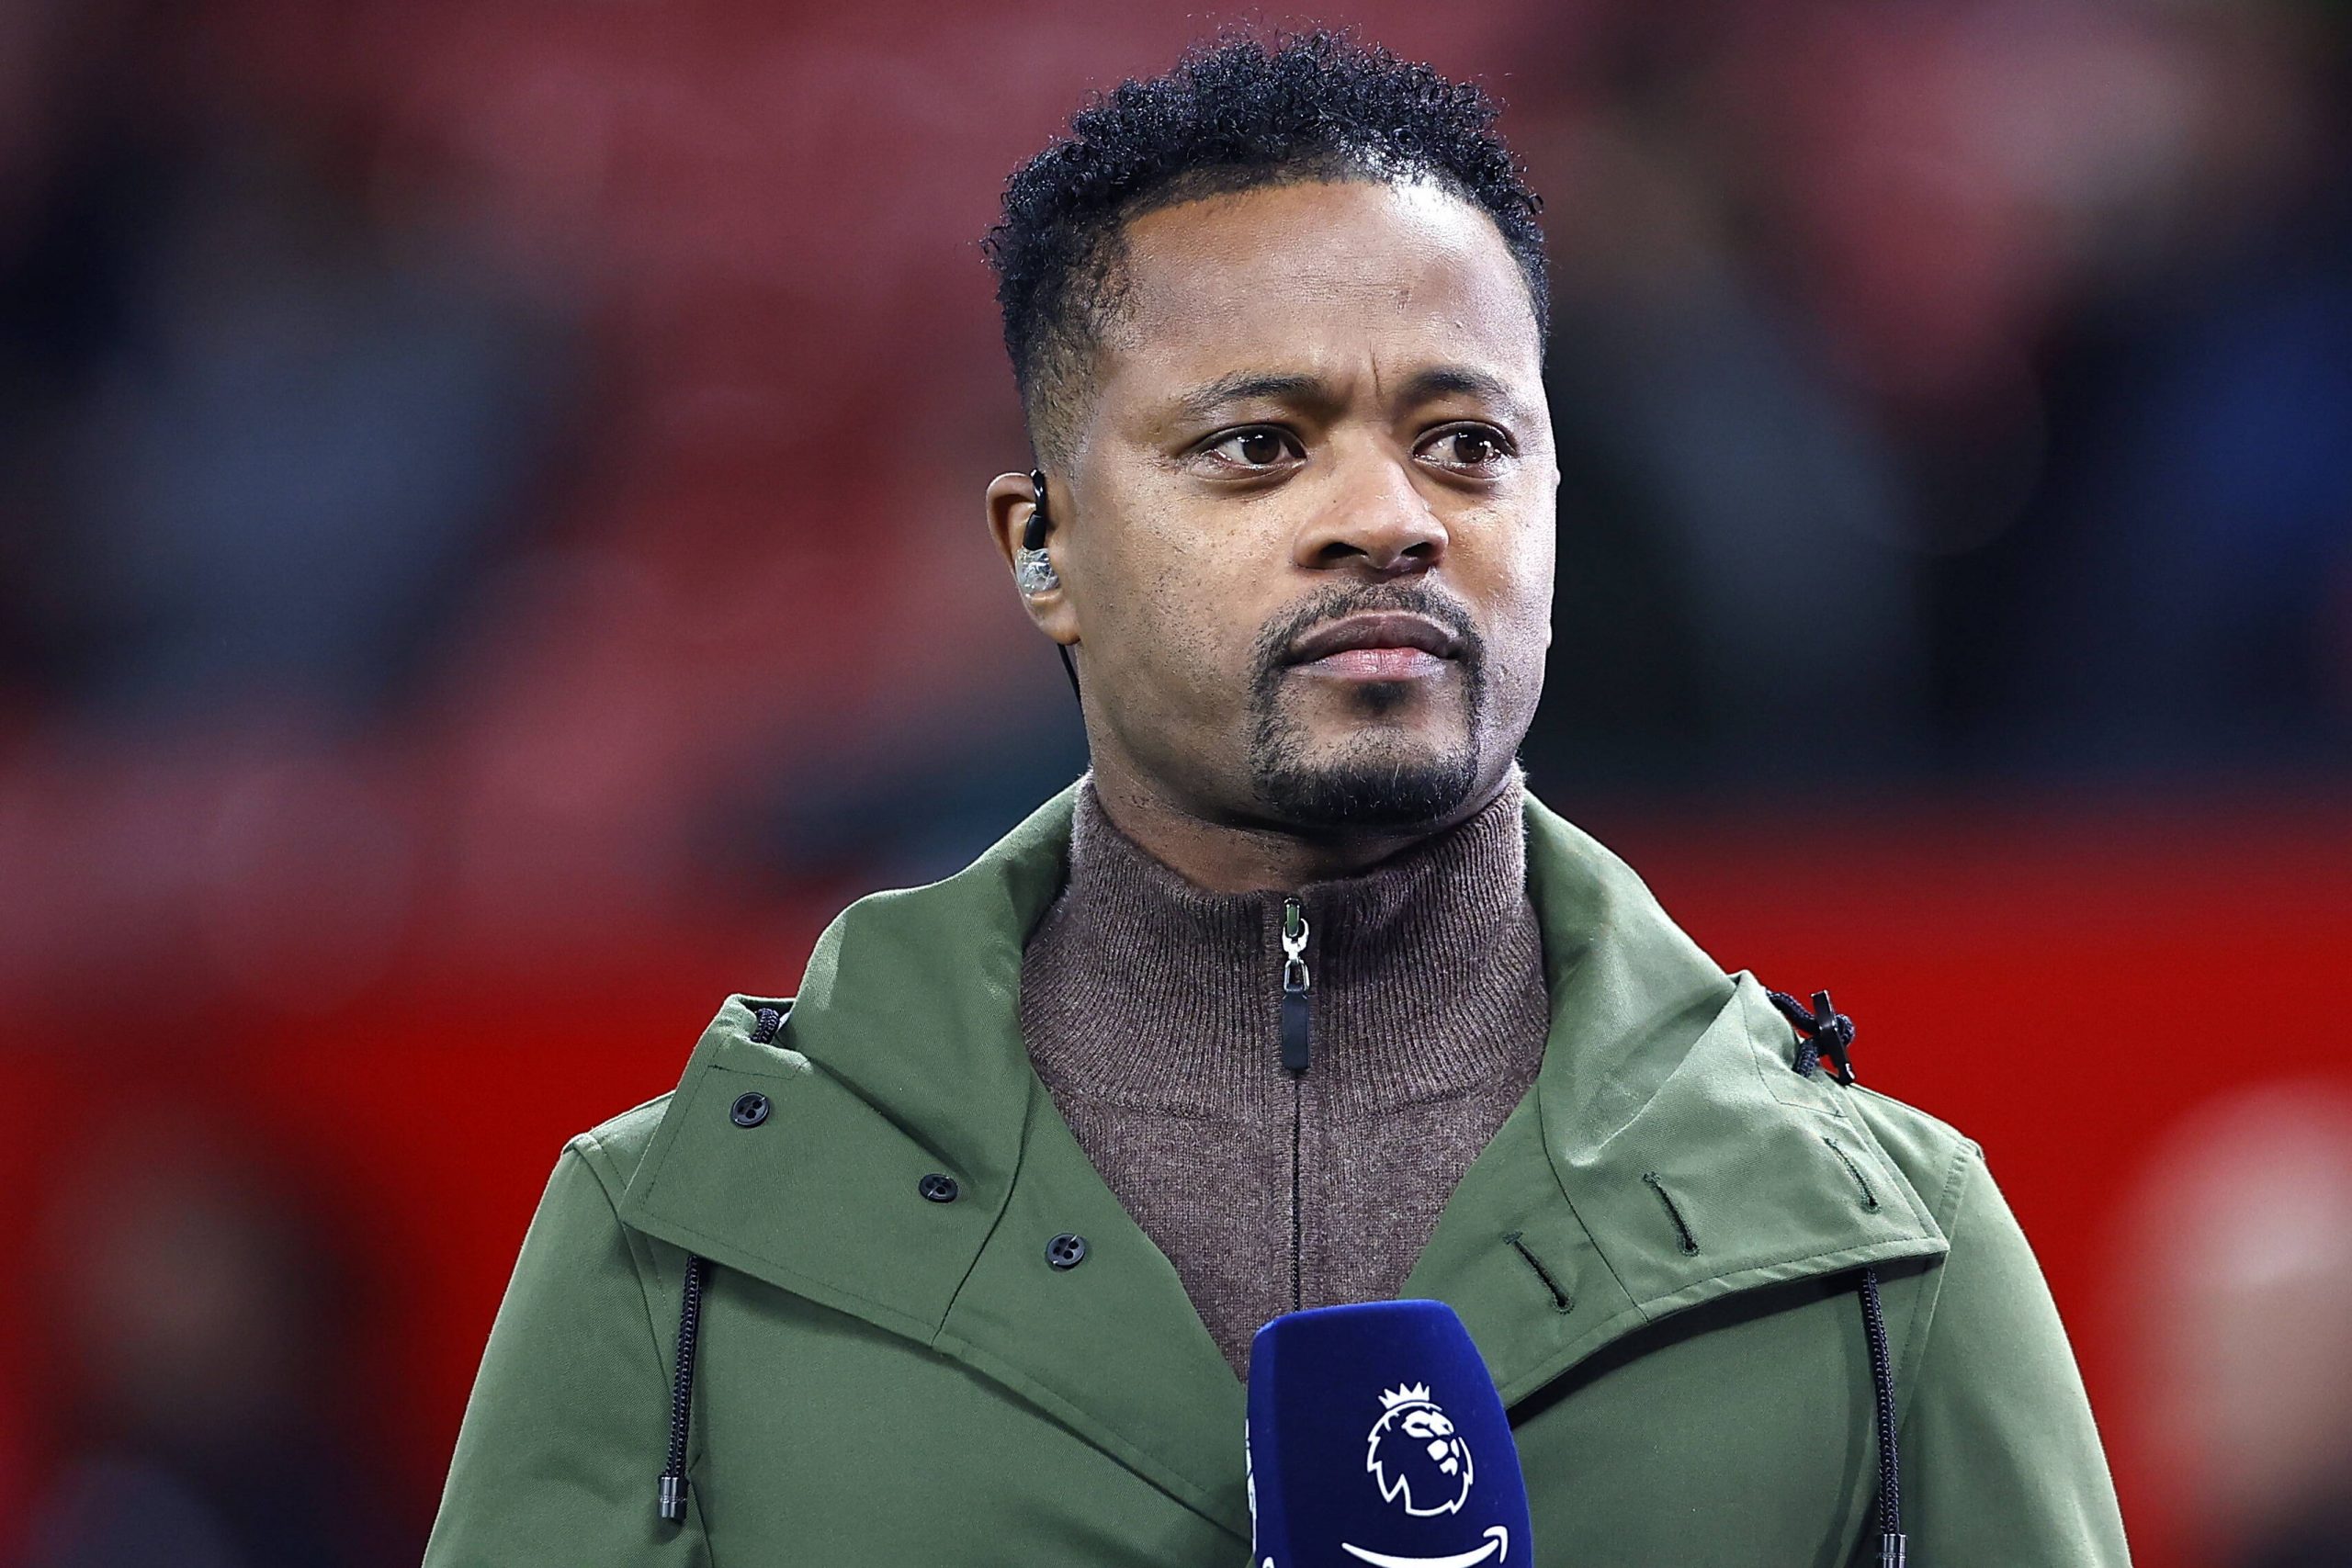 Football - 2022 / 2023 Premier League - Manchester United, ManU vs Tottenham Hotspur - Old Trafford - Wednesday 19th October 2022 Former Manchester United legend Patrice Evra on media duties before the game tonight, at Old Trafford. PUBLICATIONxNOTxINxUK